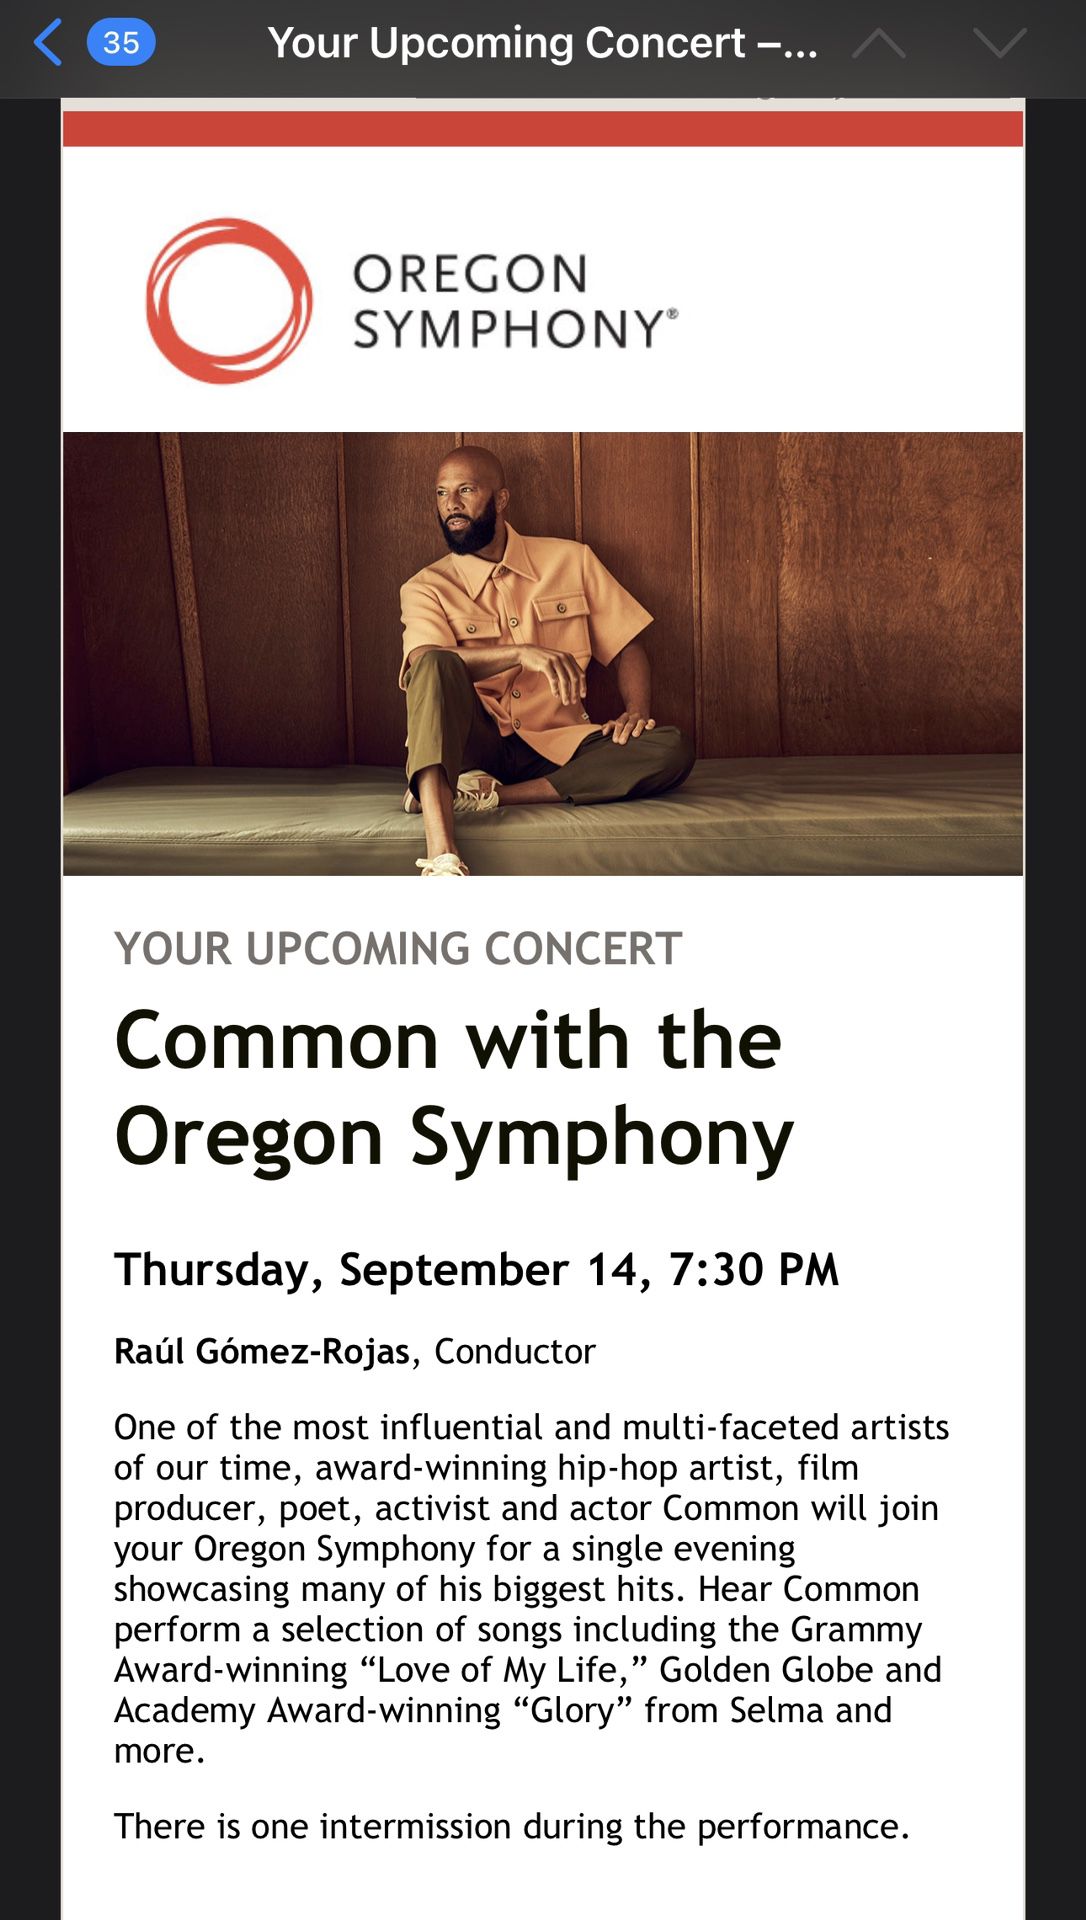 Common with the Oregon Symphony 9/14